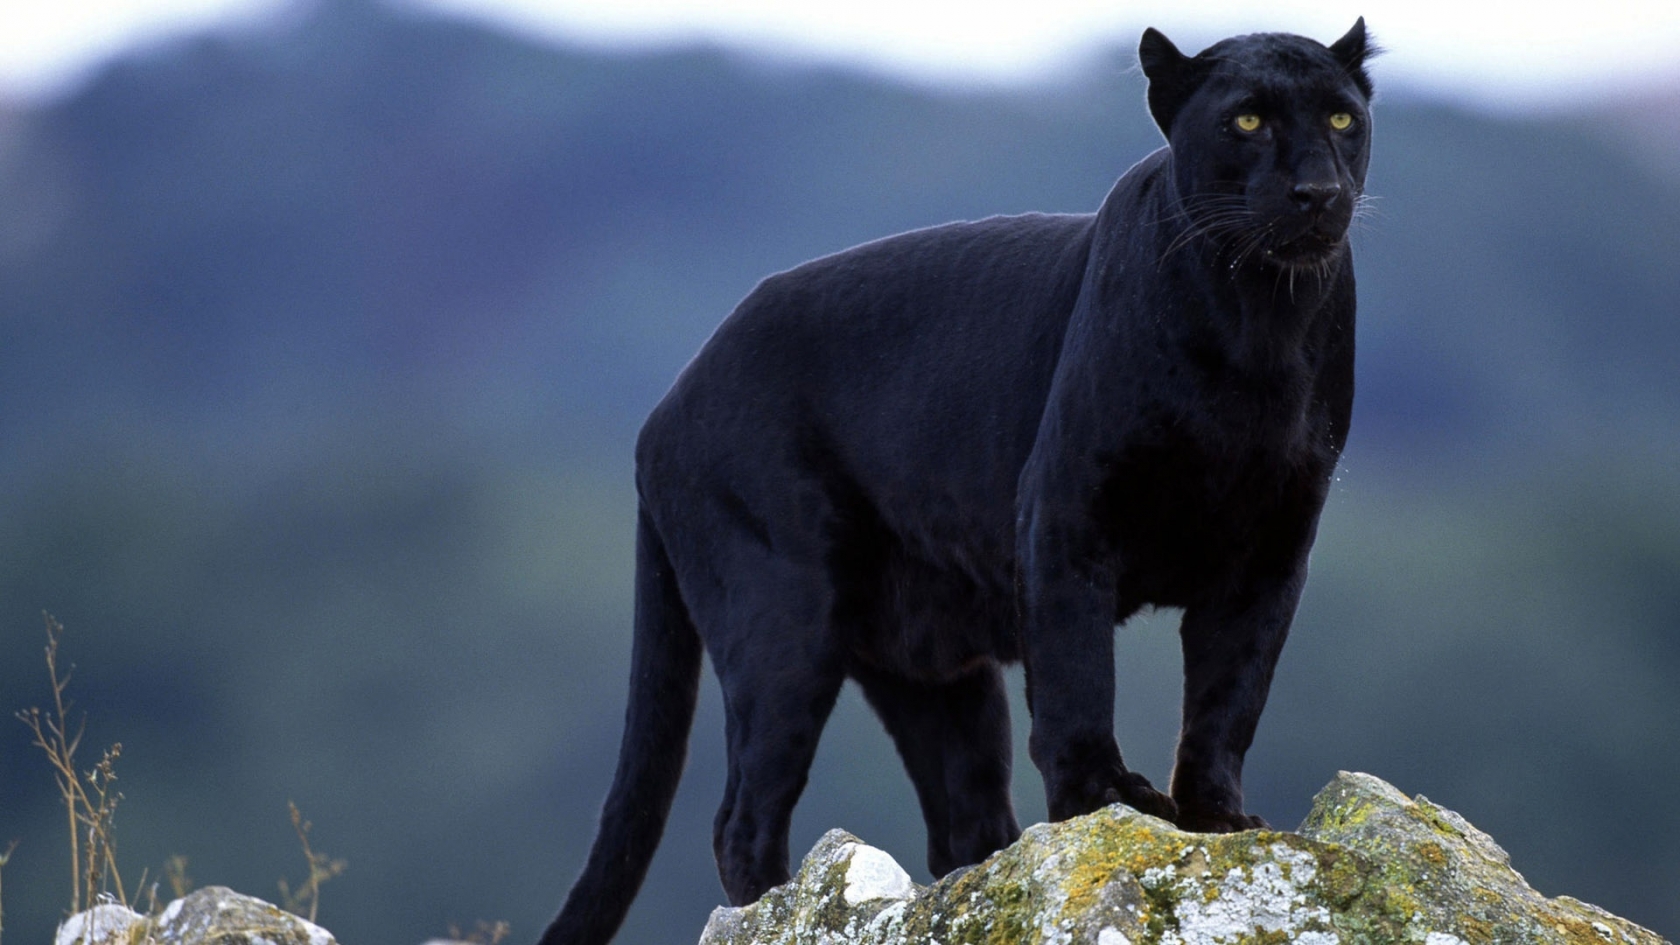 Superb Panther for 1680 x 945 HDTV resolution